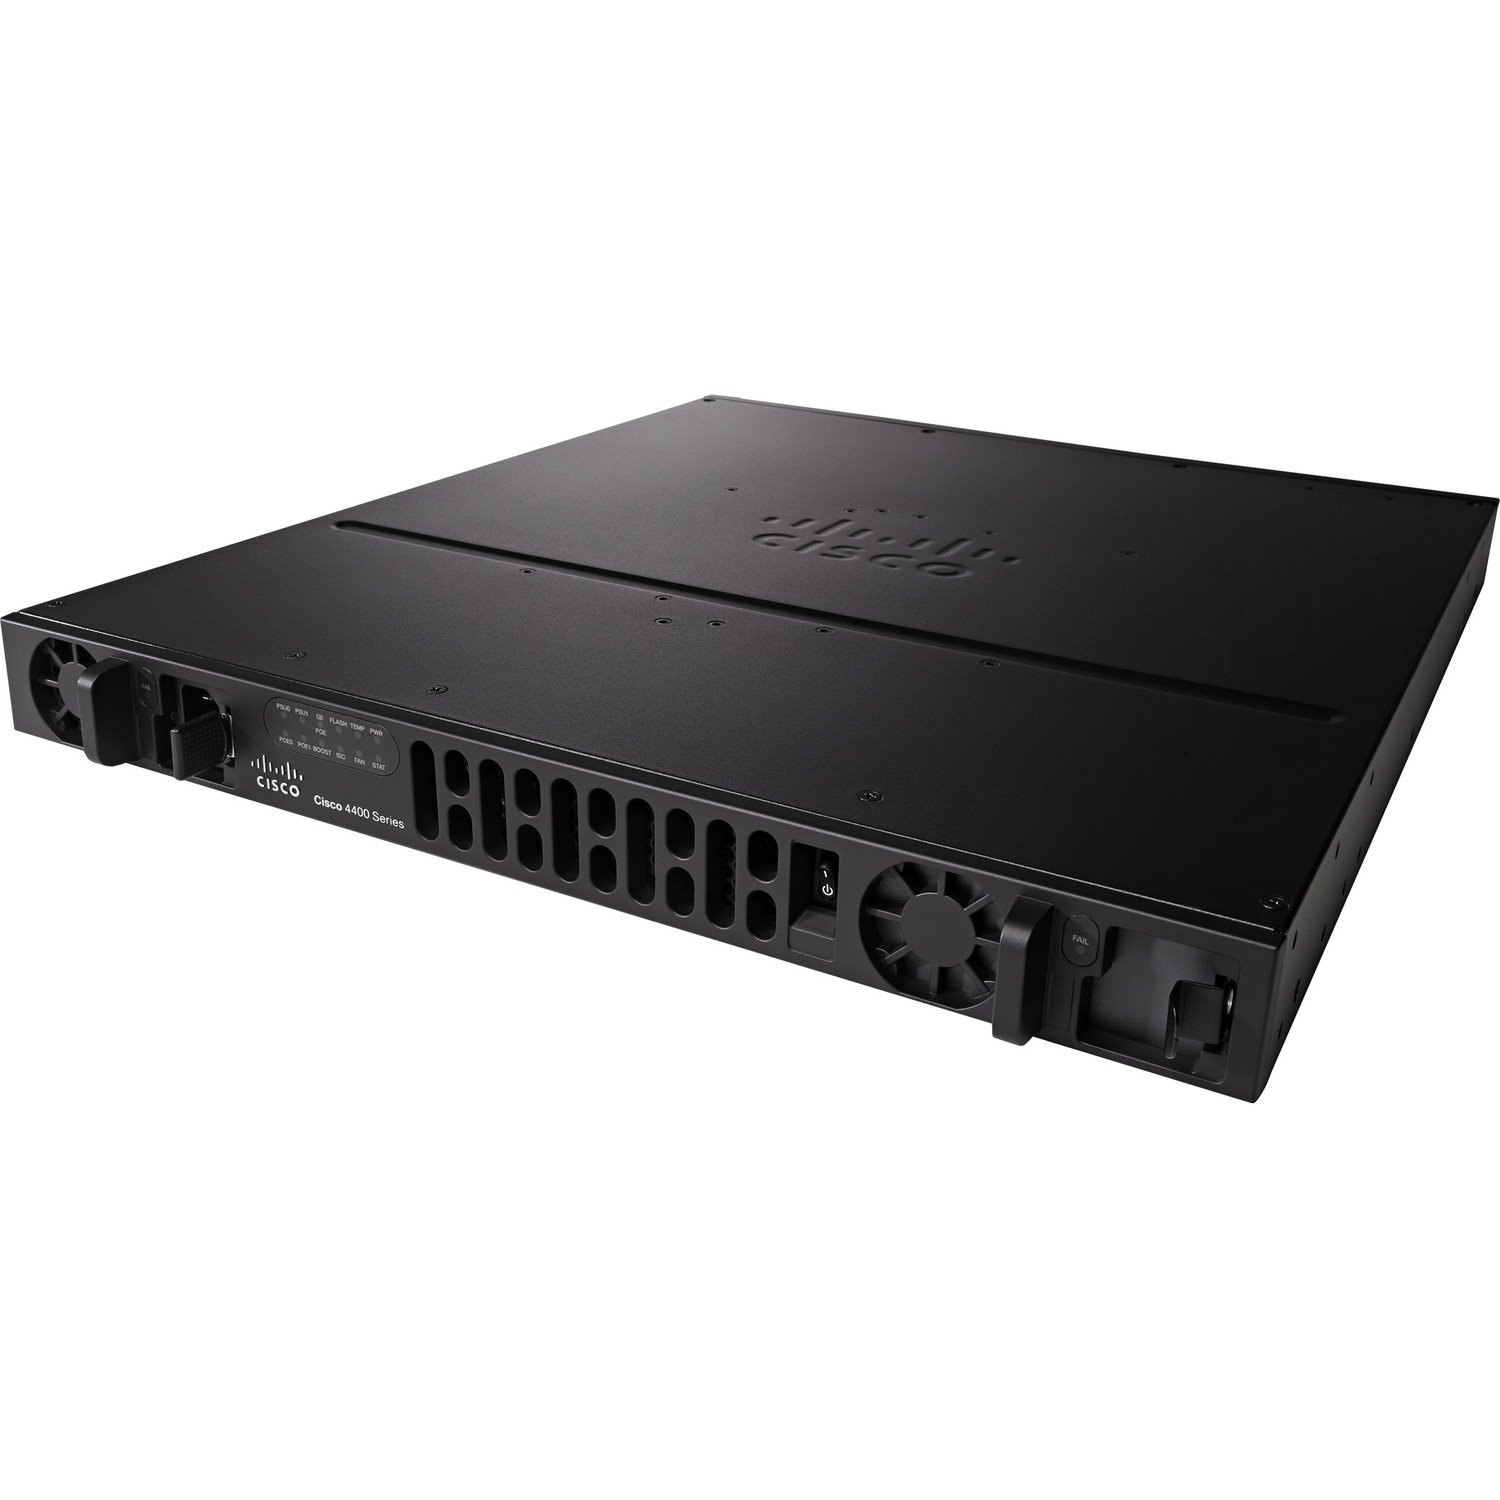 Cisco 4431- X Integrated Services Router